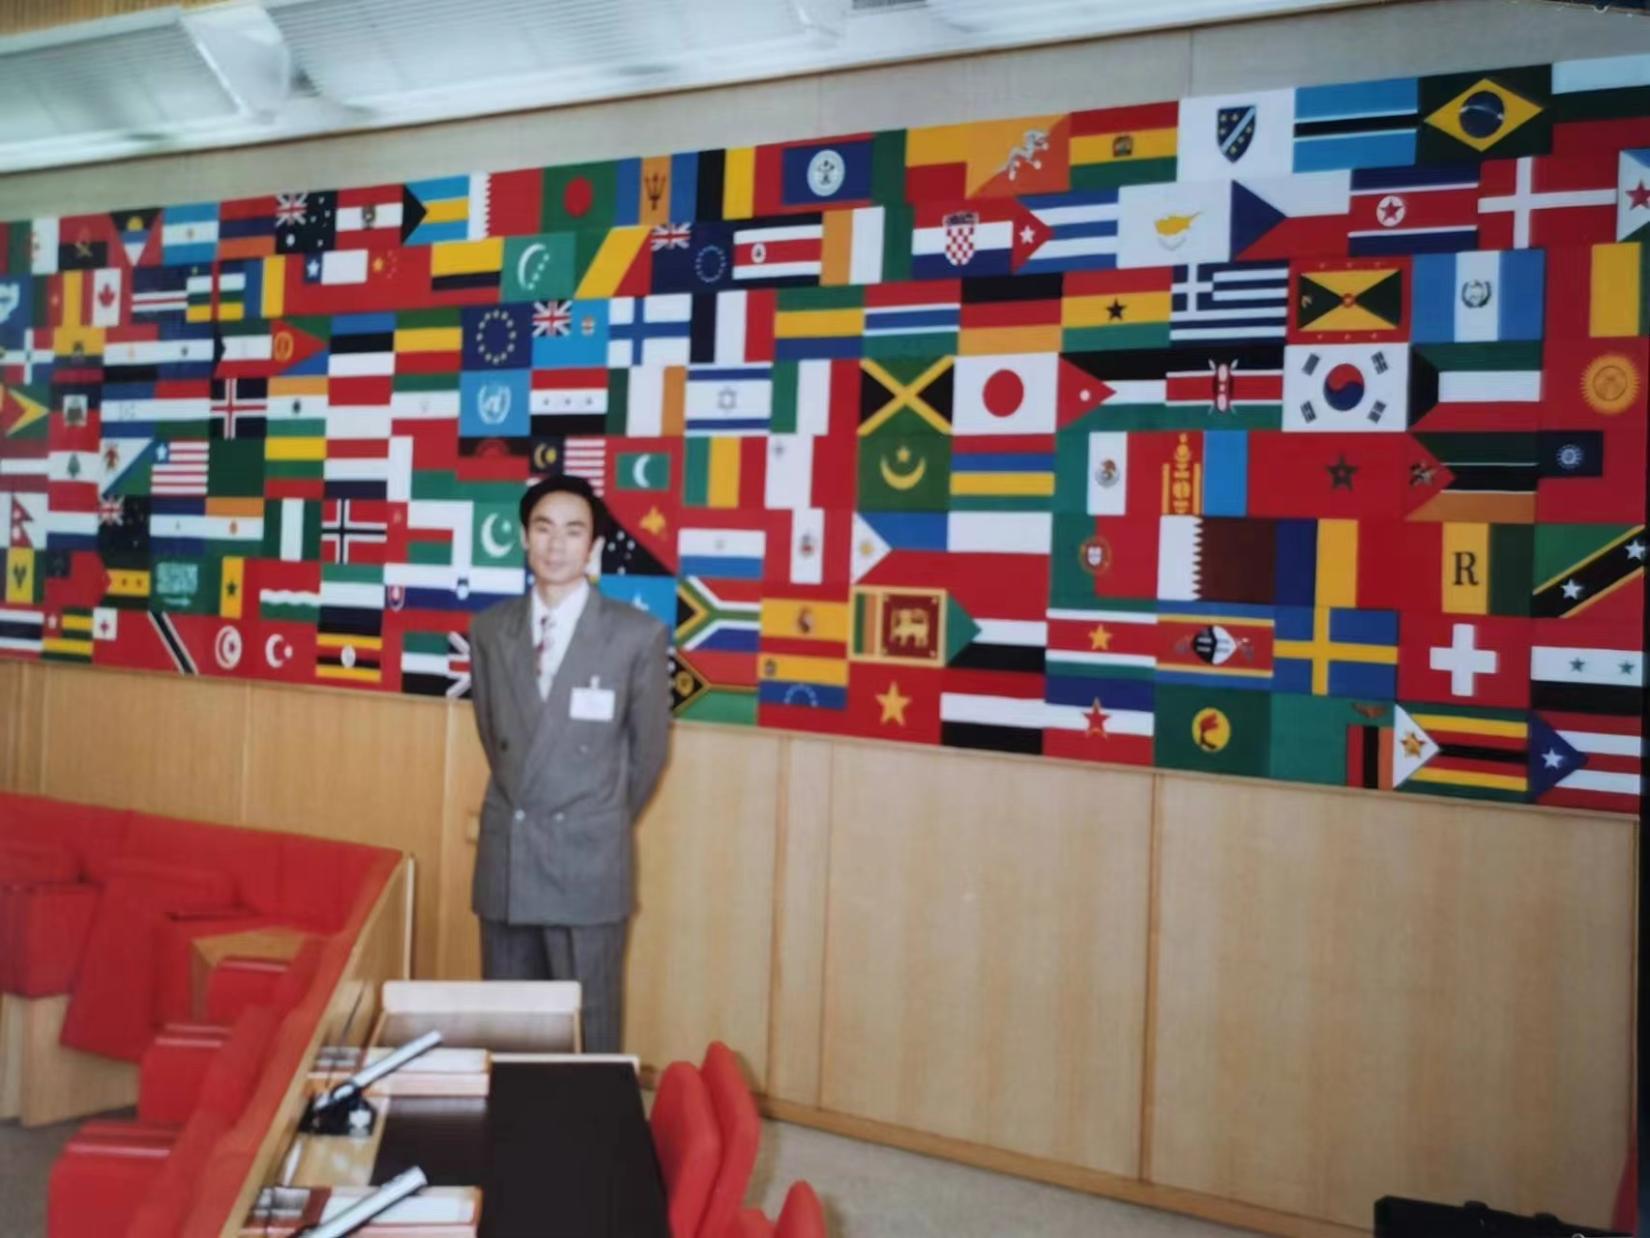 25 years ago, Dr. Sixi Qu attended the FAO Council in Rome